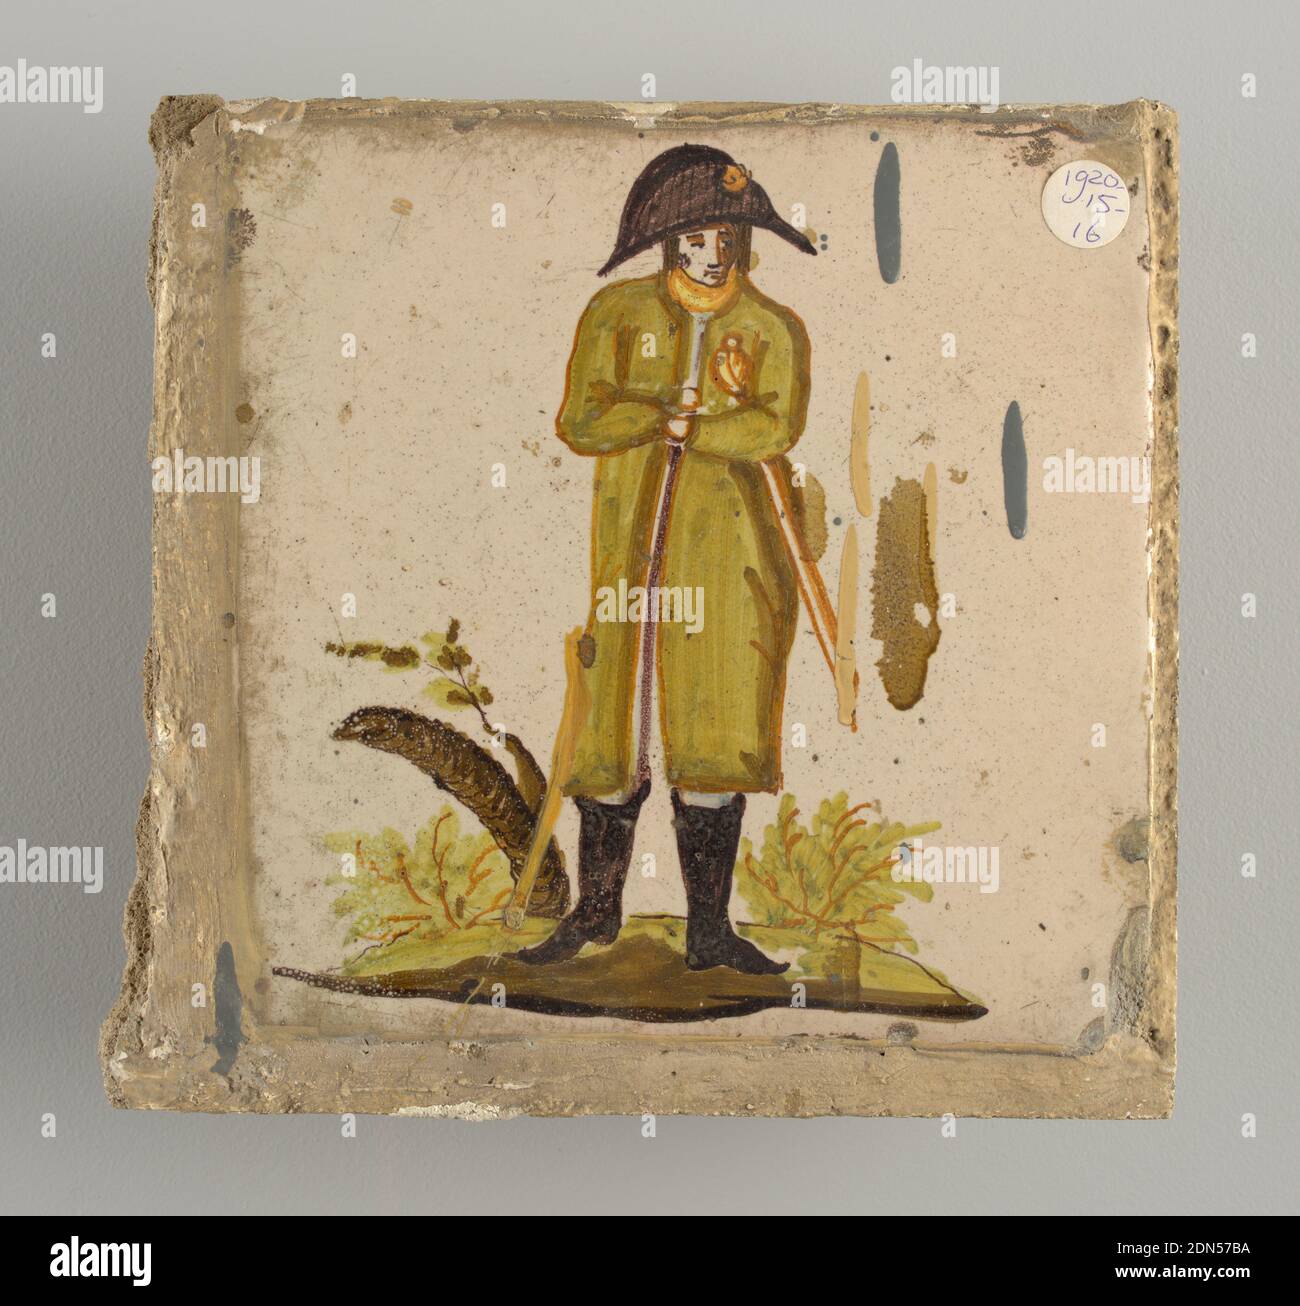 Tile, Earthenware, glazed and high fire decorated, Soldier in black boots, green coat and bicorn hat, clutching a sword under his left arm. Tree trunk with a few leaves at the left., Alcora, Spain, late 18th–early 19th century, tiles, Decorative Arts, Tile Stock Photo